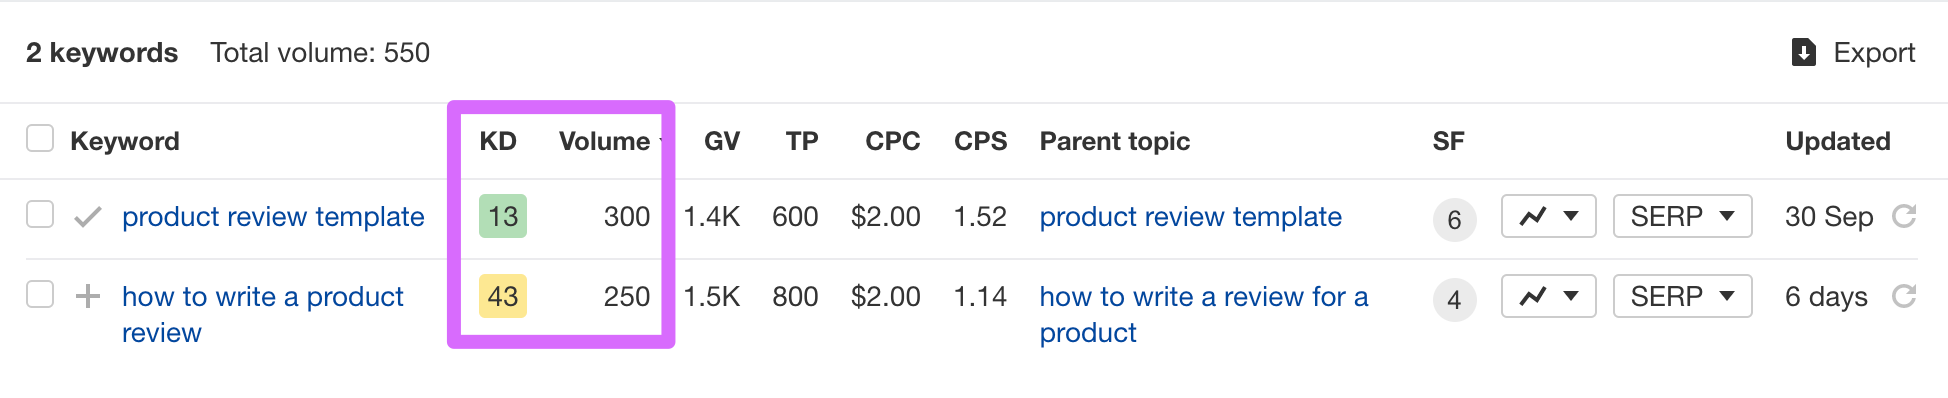 ahrefs keyword difficulty scores for writing a product review